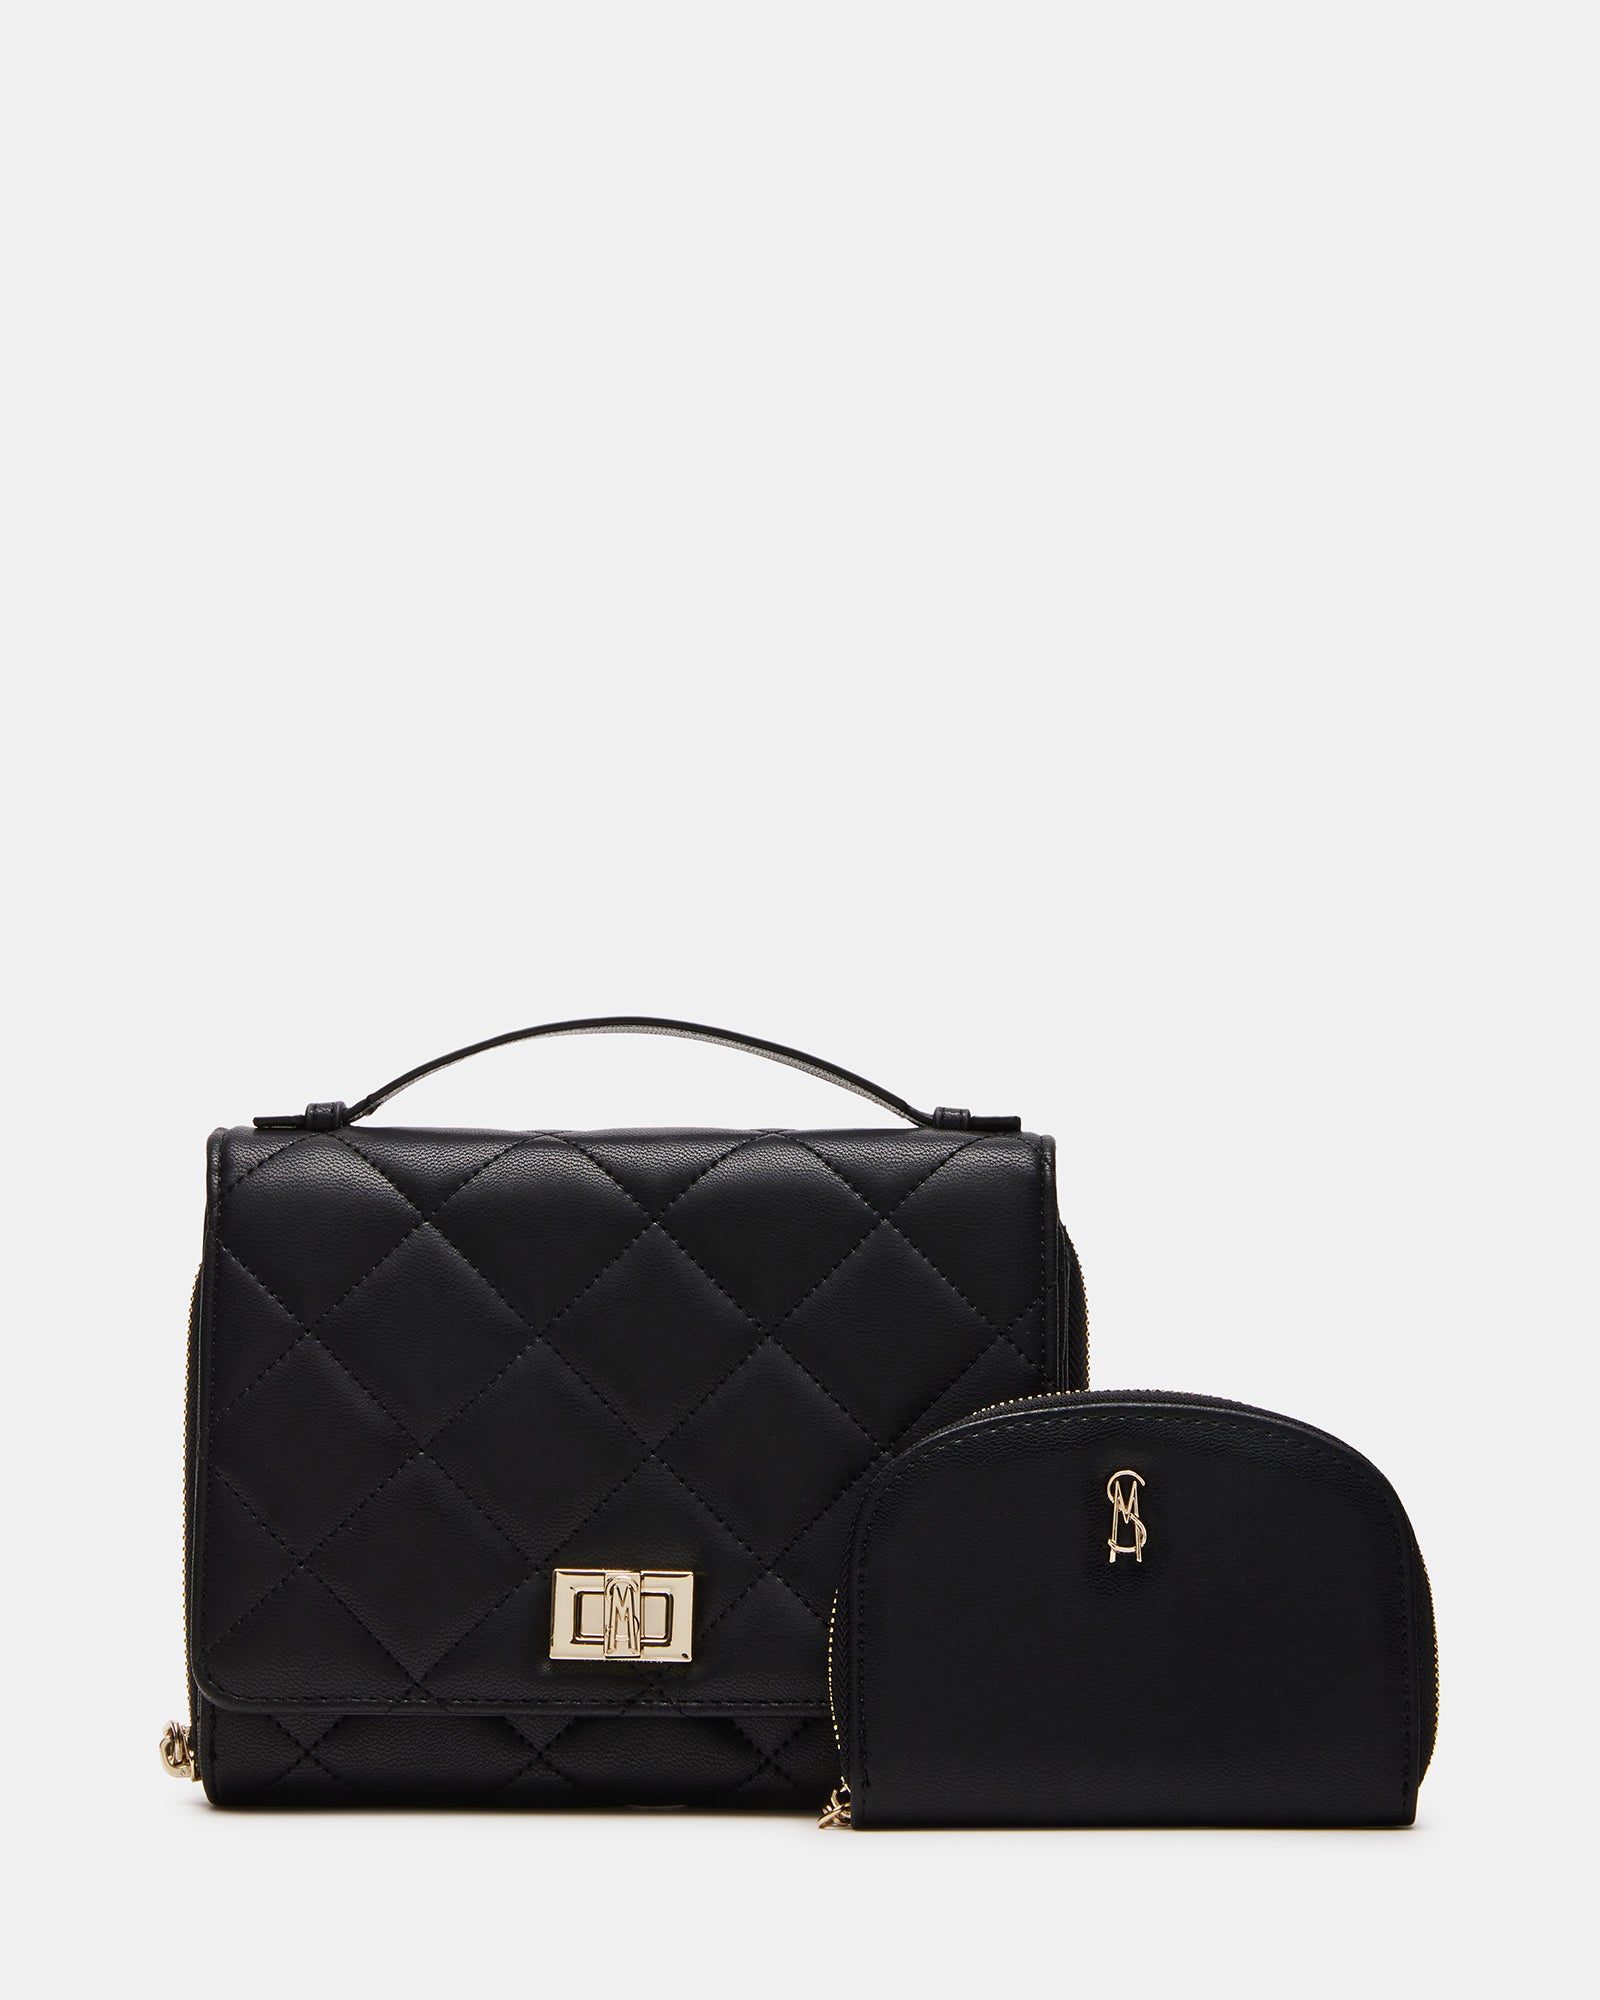 Kate Spade - Black Leather Quilted Crossbody w/ Chain Strap